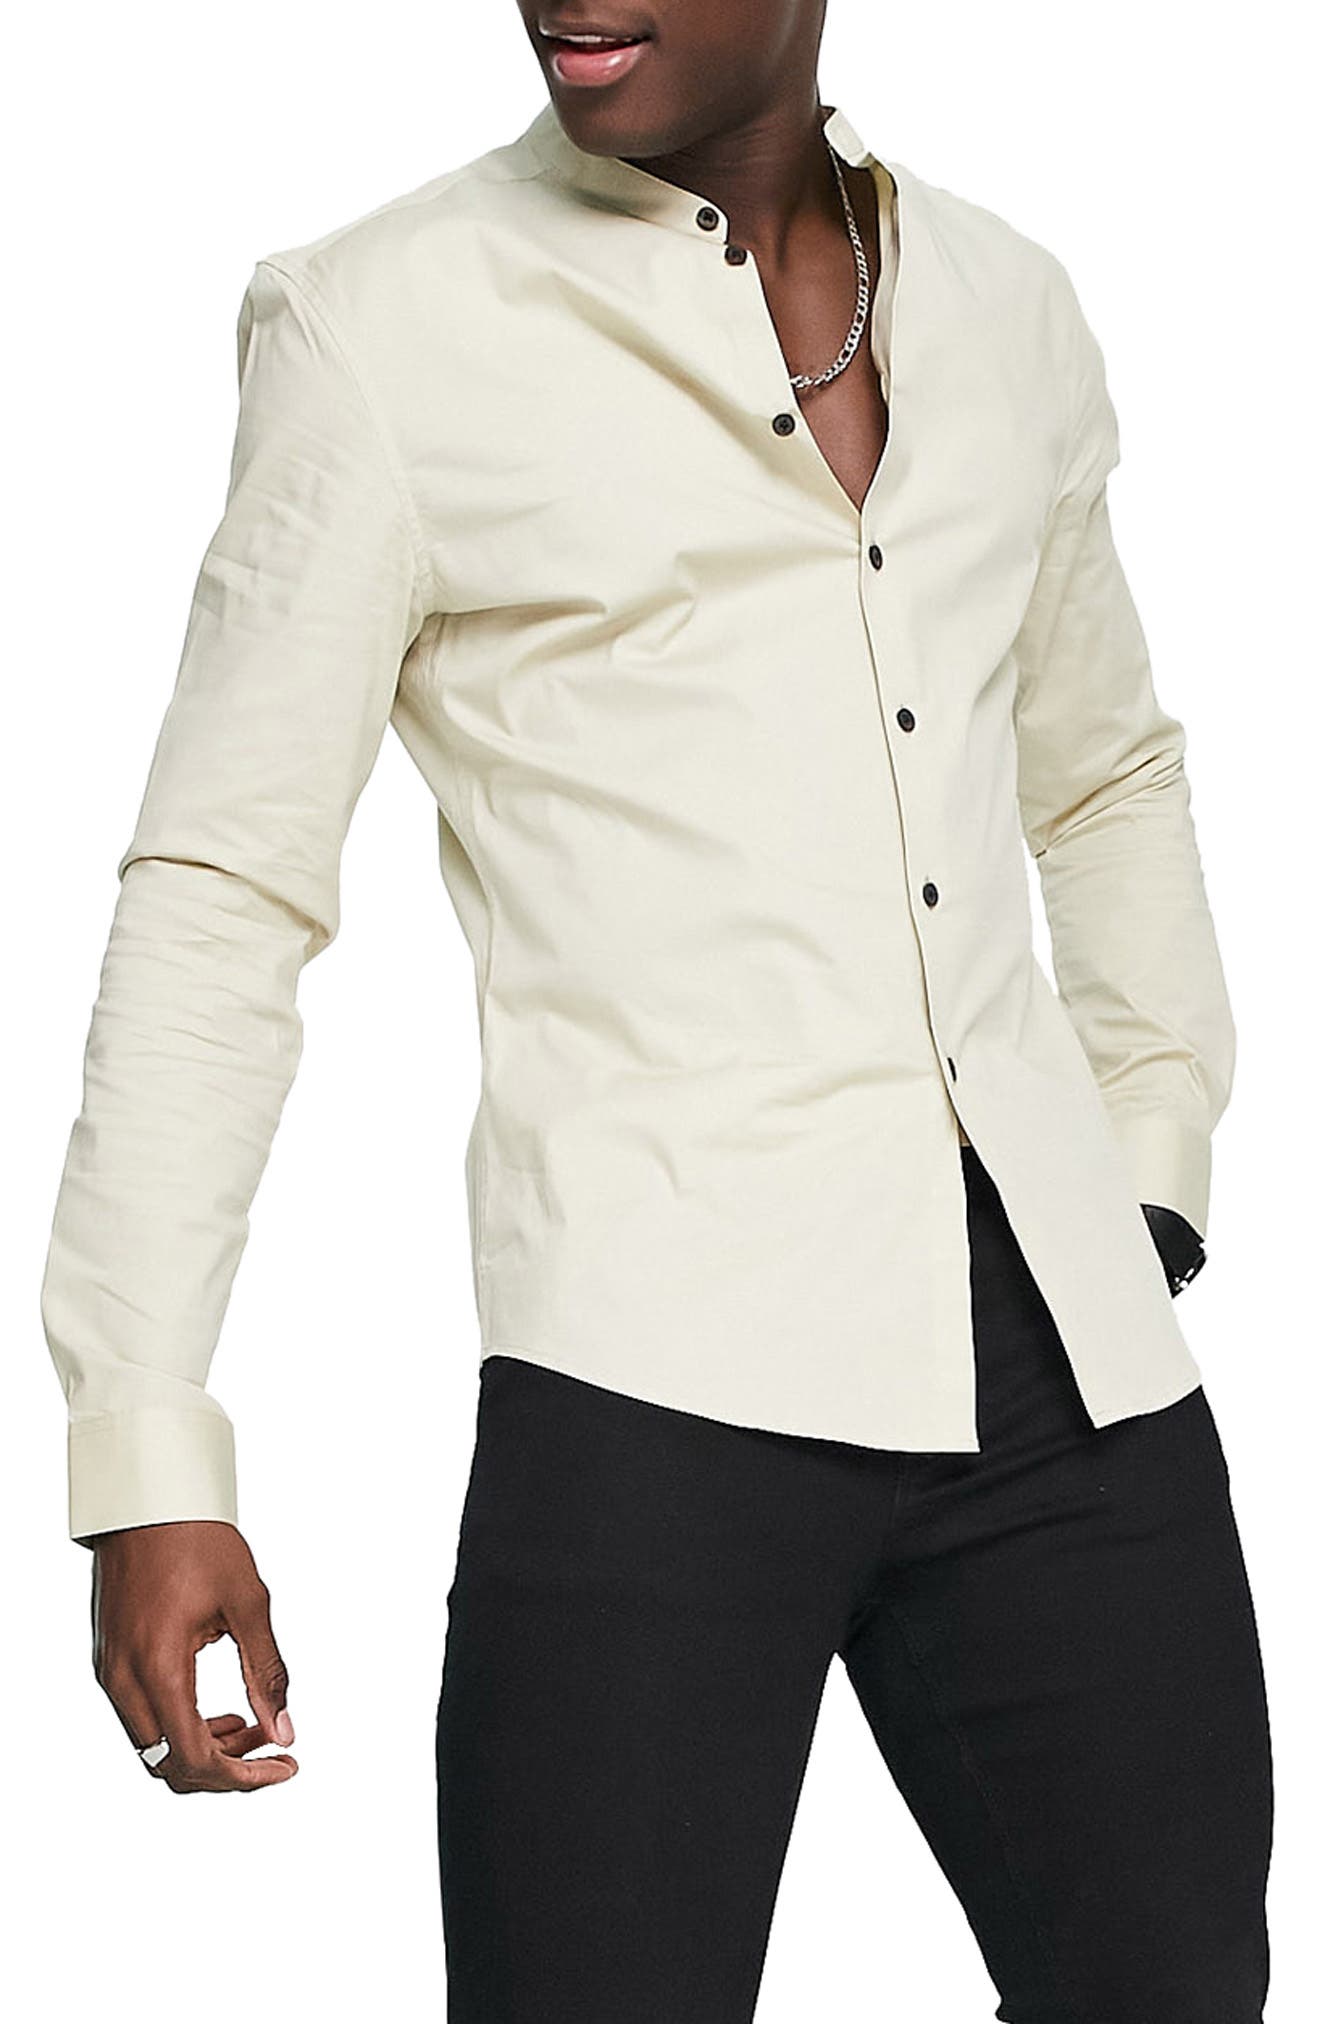 ASOS DESIGN Skinny Fit Stretch Cotton Button-Up Shirt in Stone